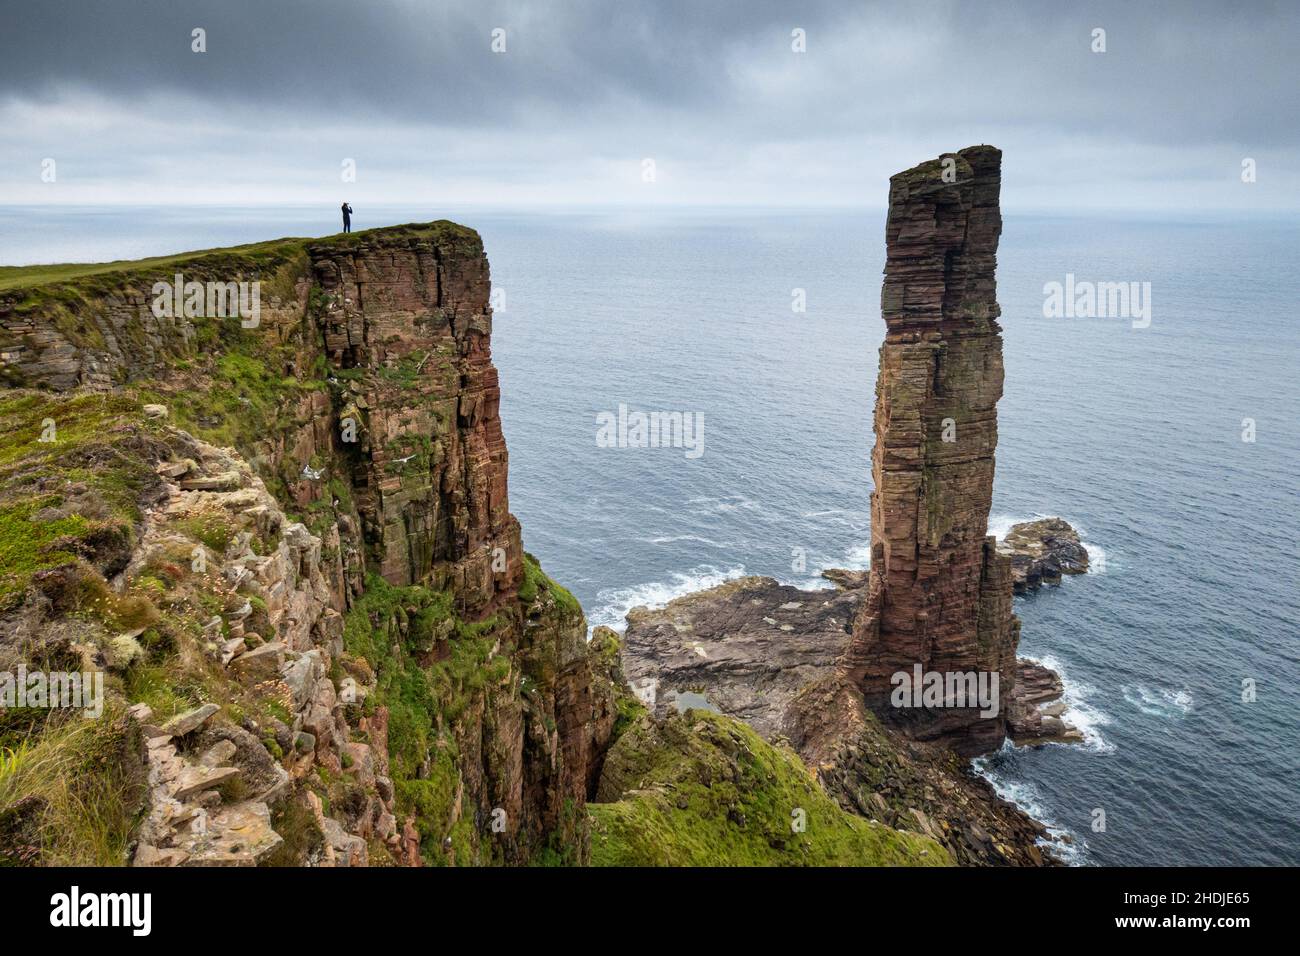 The Old Man of Hoy, Orkney, Écosse, Royaume-Uni Banque D'Images